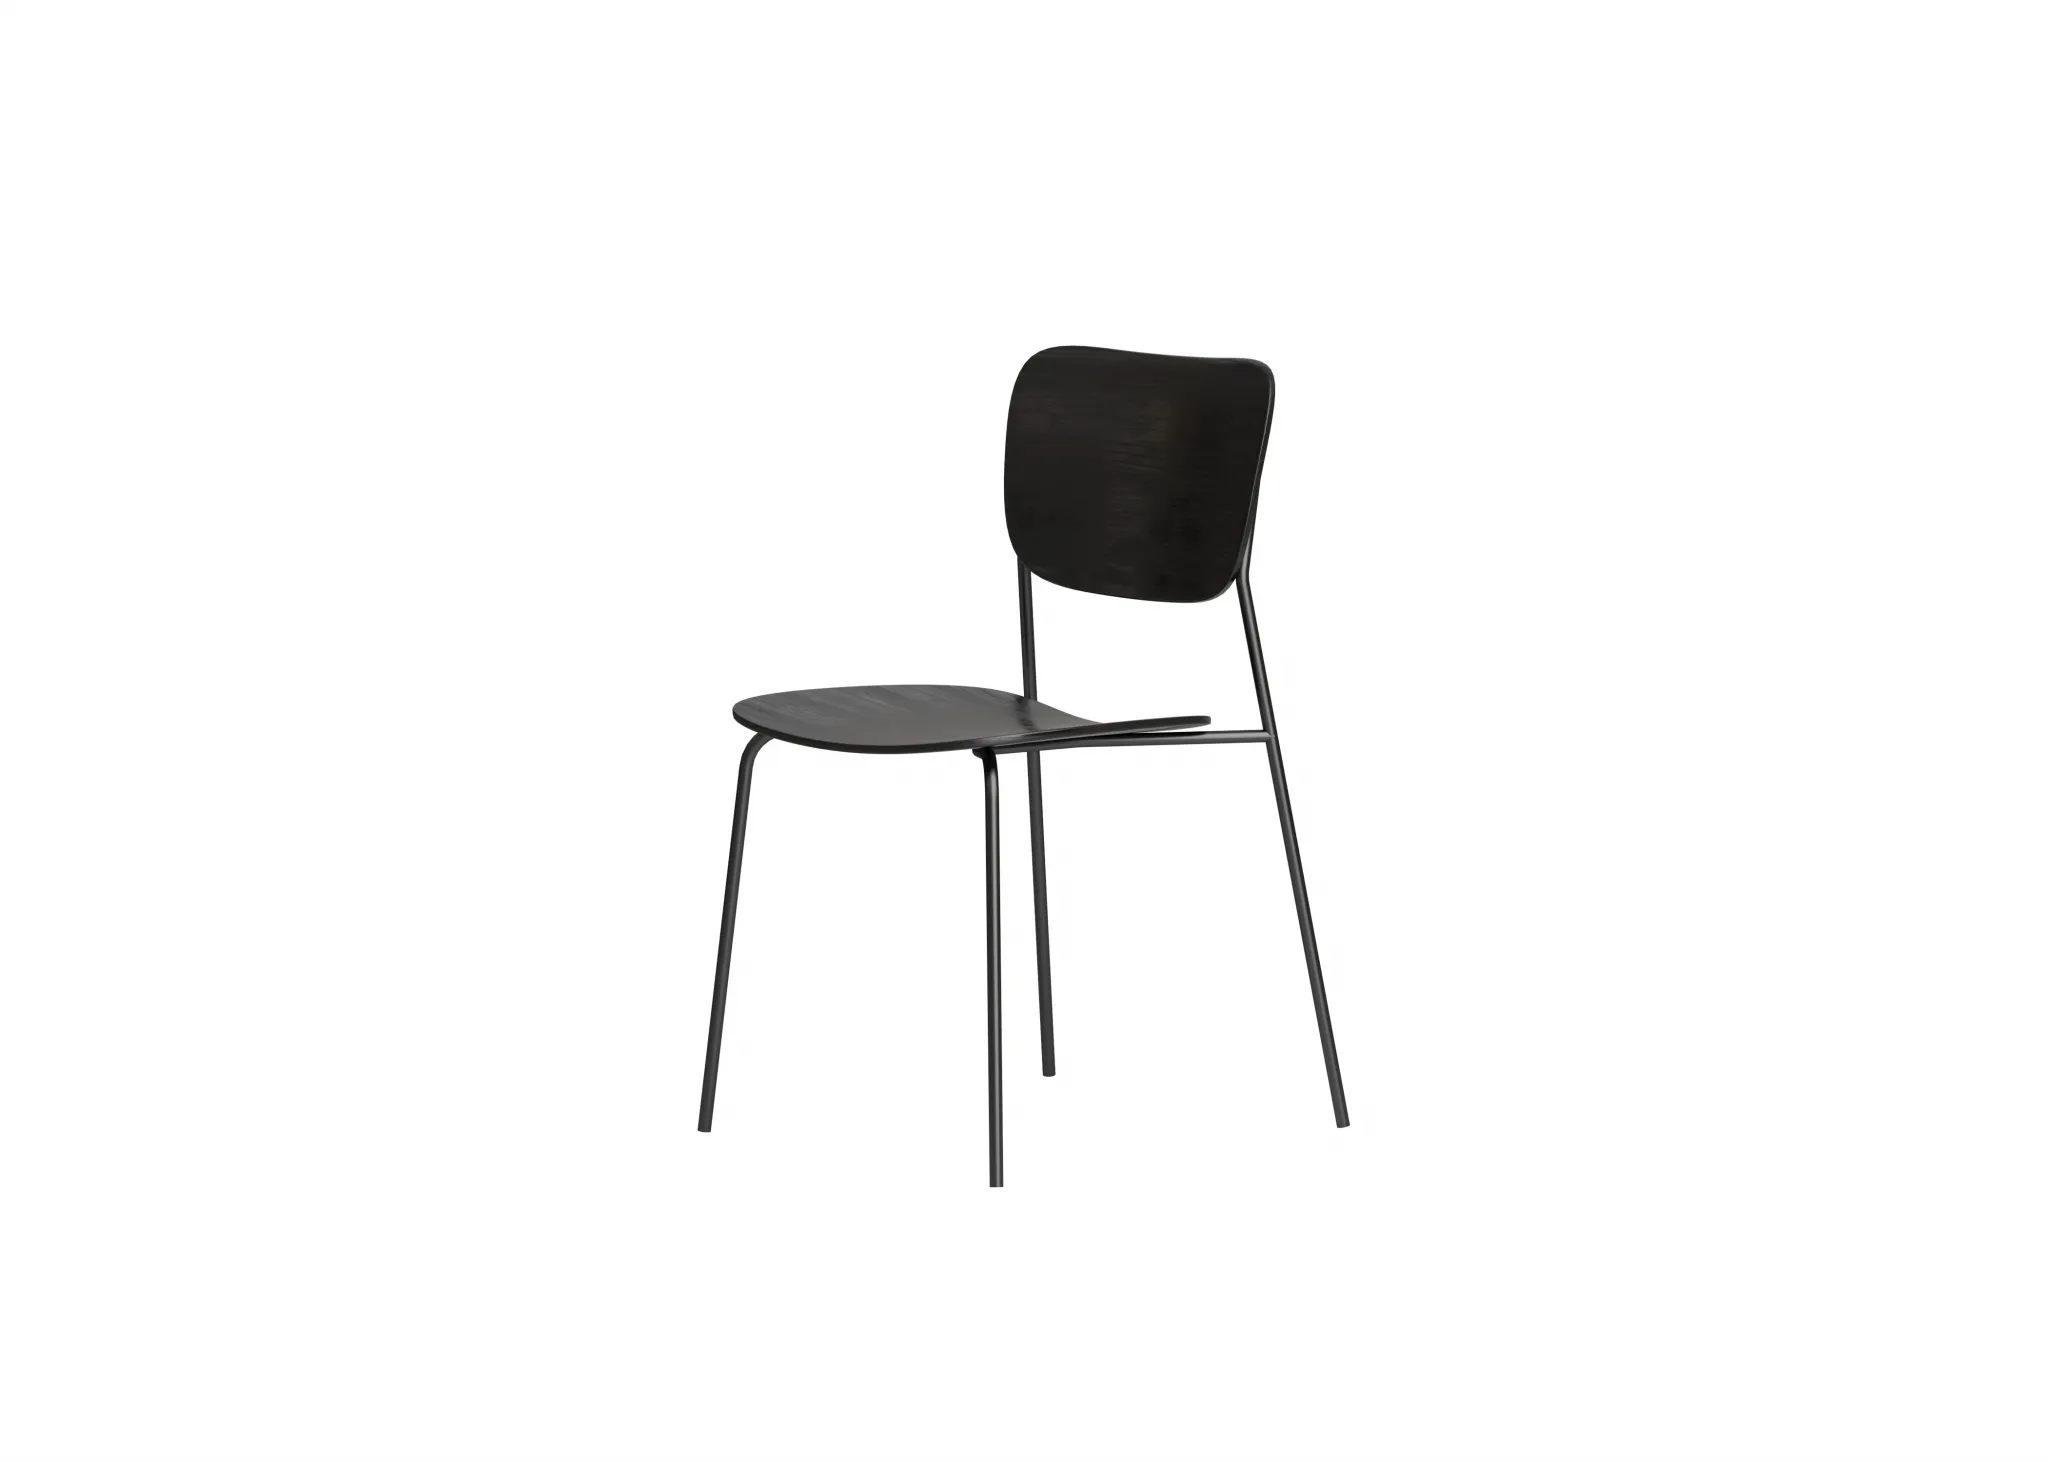 FURNITURE 3D MODELS – CHAIRS – 0069